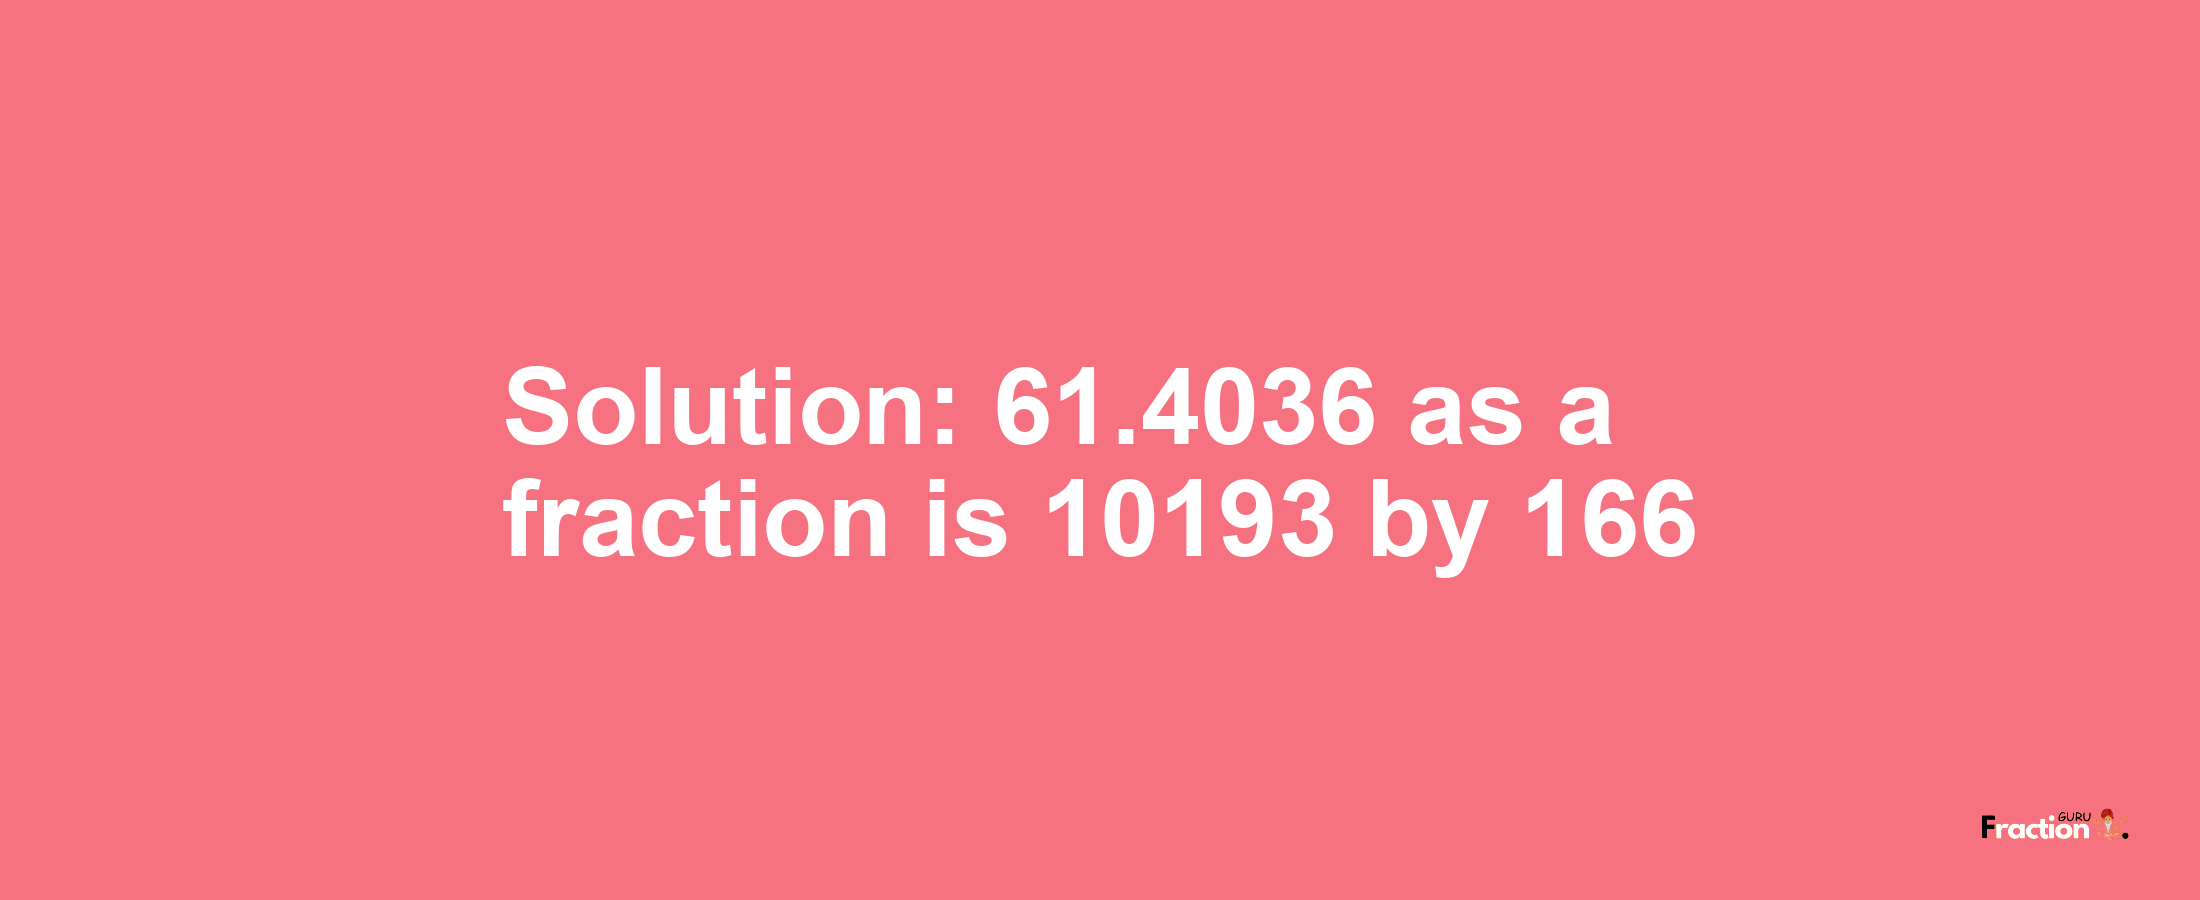 Solution:61.4036 as a fraction is 10193/166